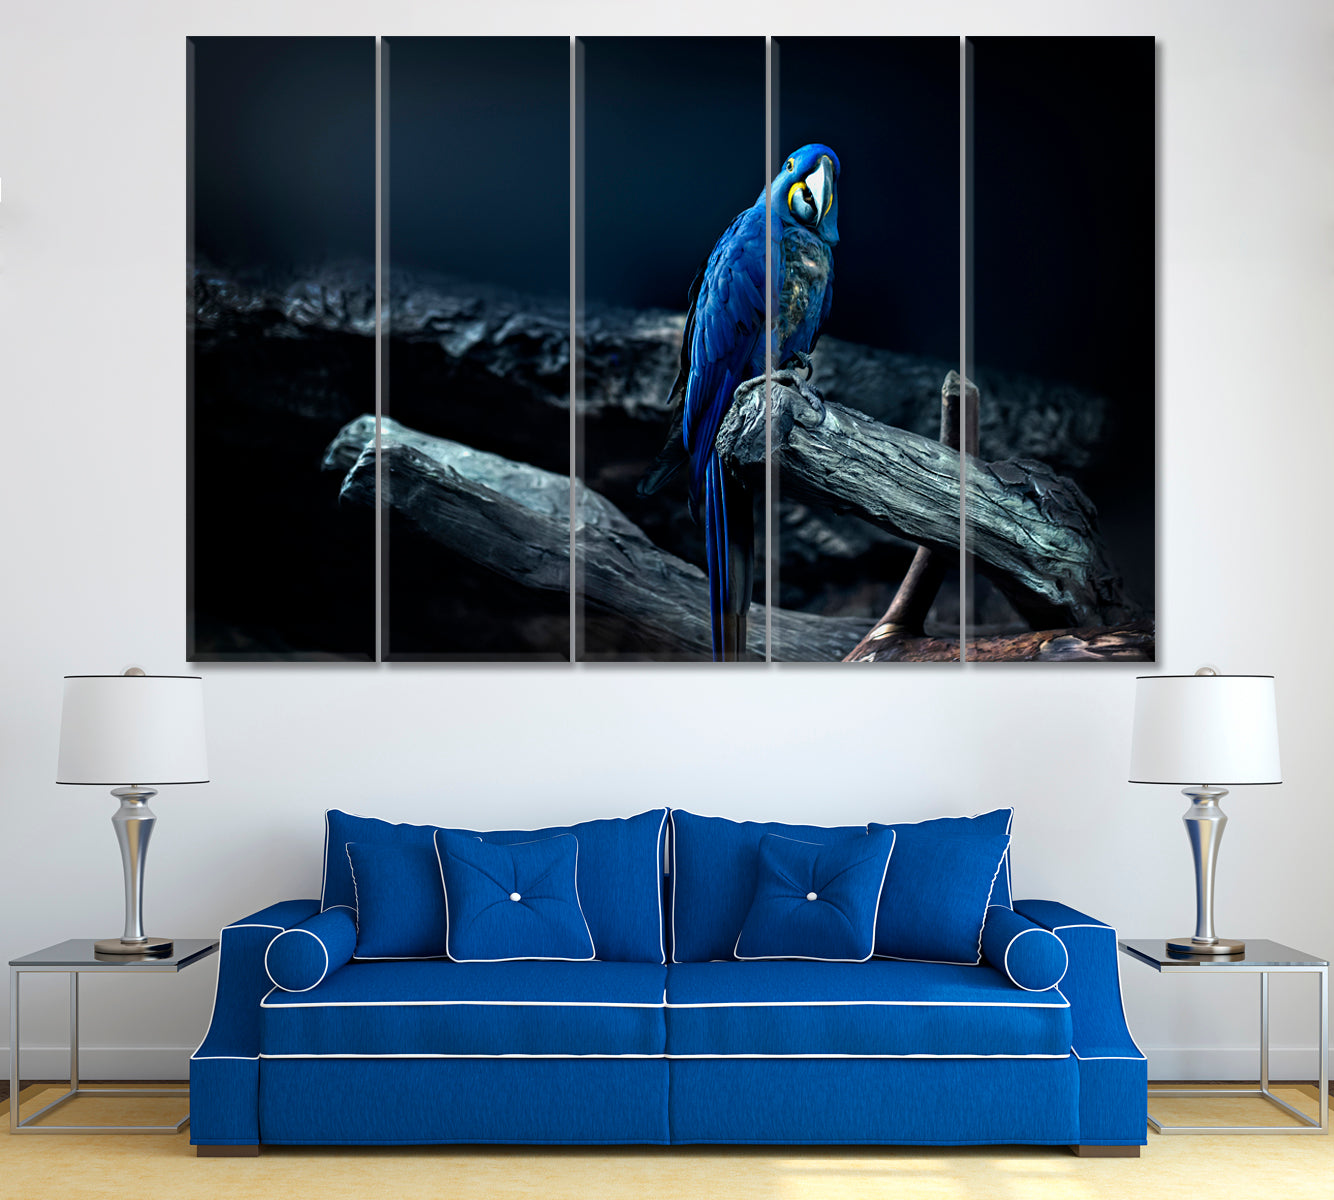 Hyacinth Macaw Parrot Canvas Print ArtLexy 5 Panels 36"x24" inches 